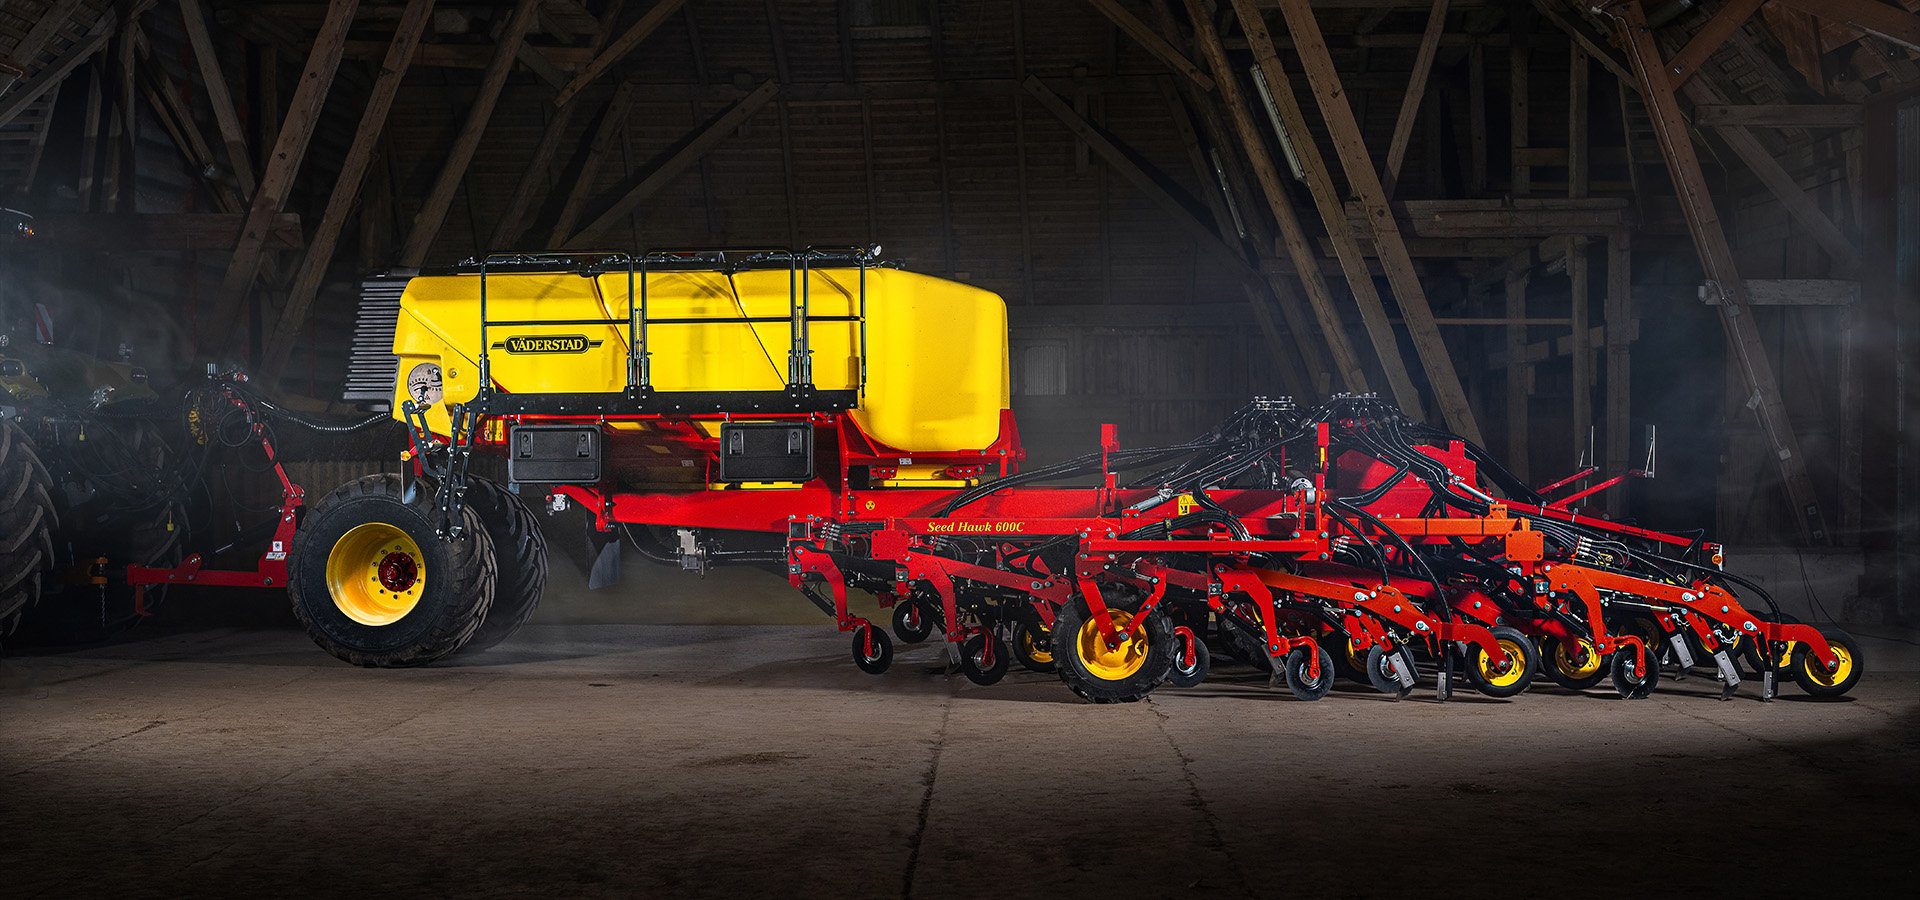 The new Seed Hawk 600-900C